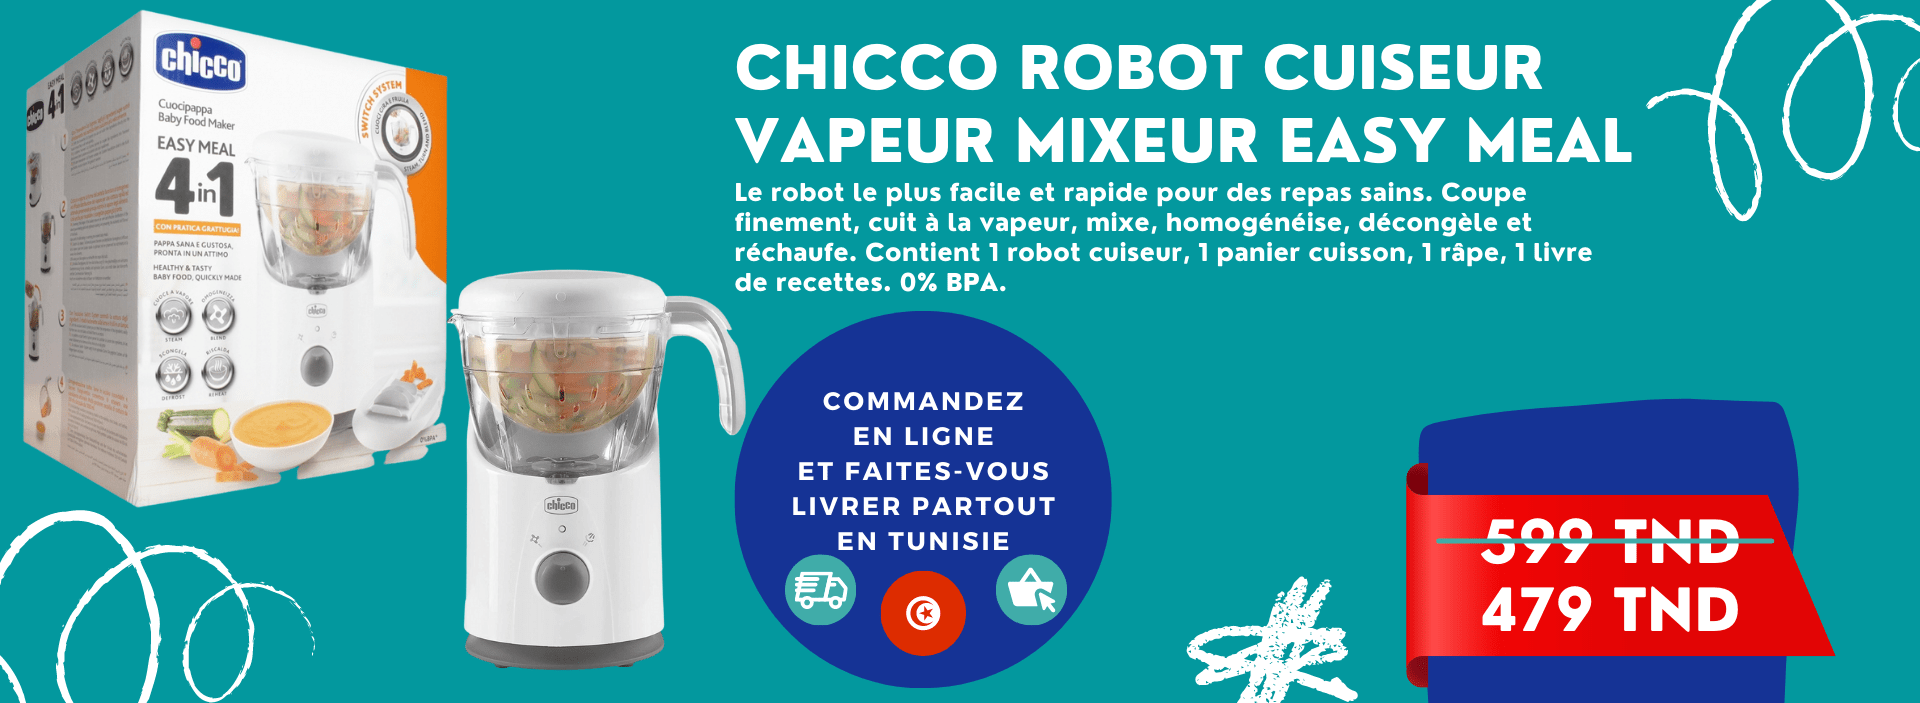 CHICCO Robot cuiseur vapeur mixeur Easy Meal